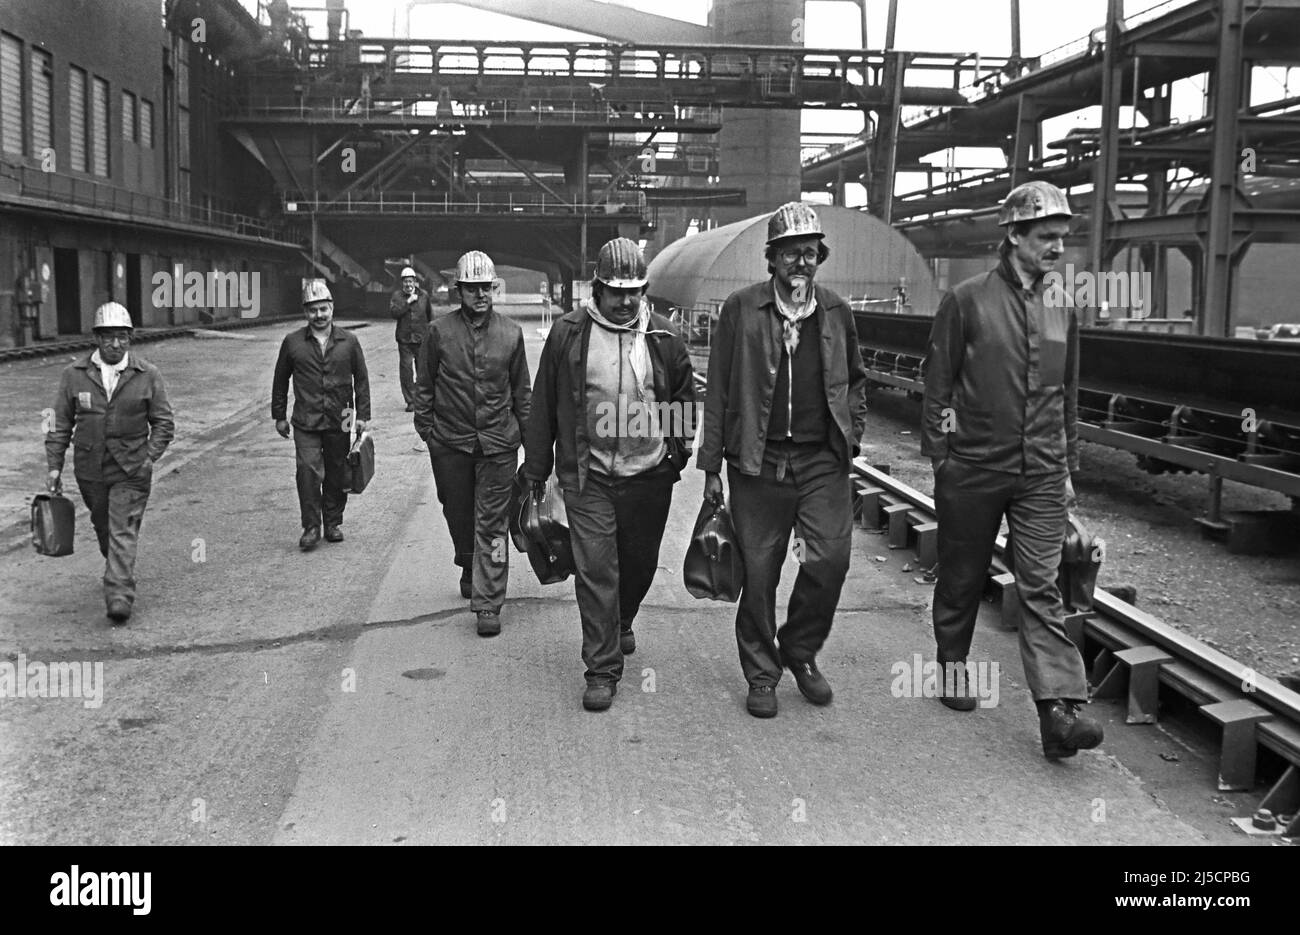 Essen, 11/17/85, JE - Feierabend, workers of the Zollverein coking plant leave their workplaces at the end of the shift. The coking plant was shut down in 1993. Together with the Zollverein colliery, the former coking plant was declared a World Heritage Site by UNESCO in 2001. [automated translation] Stock Photo